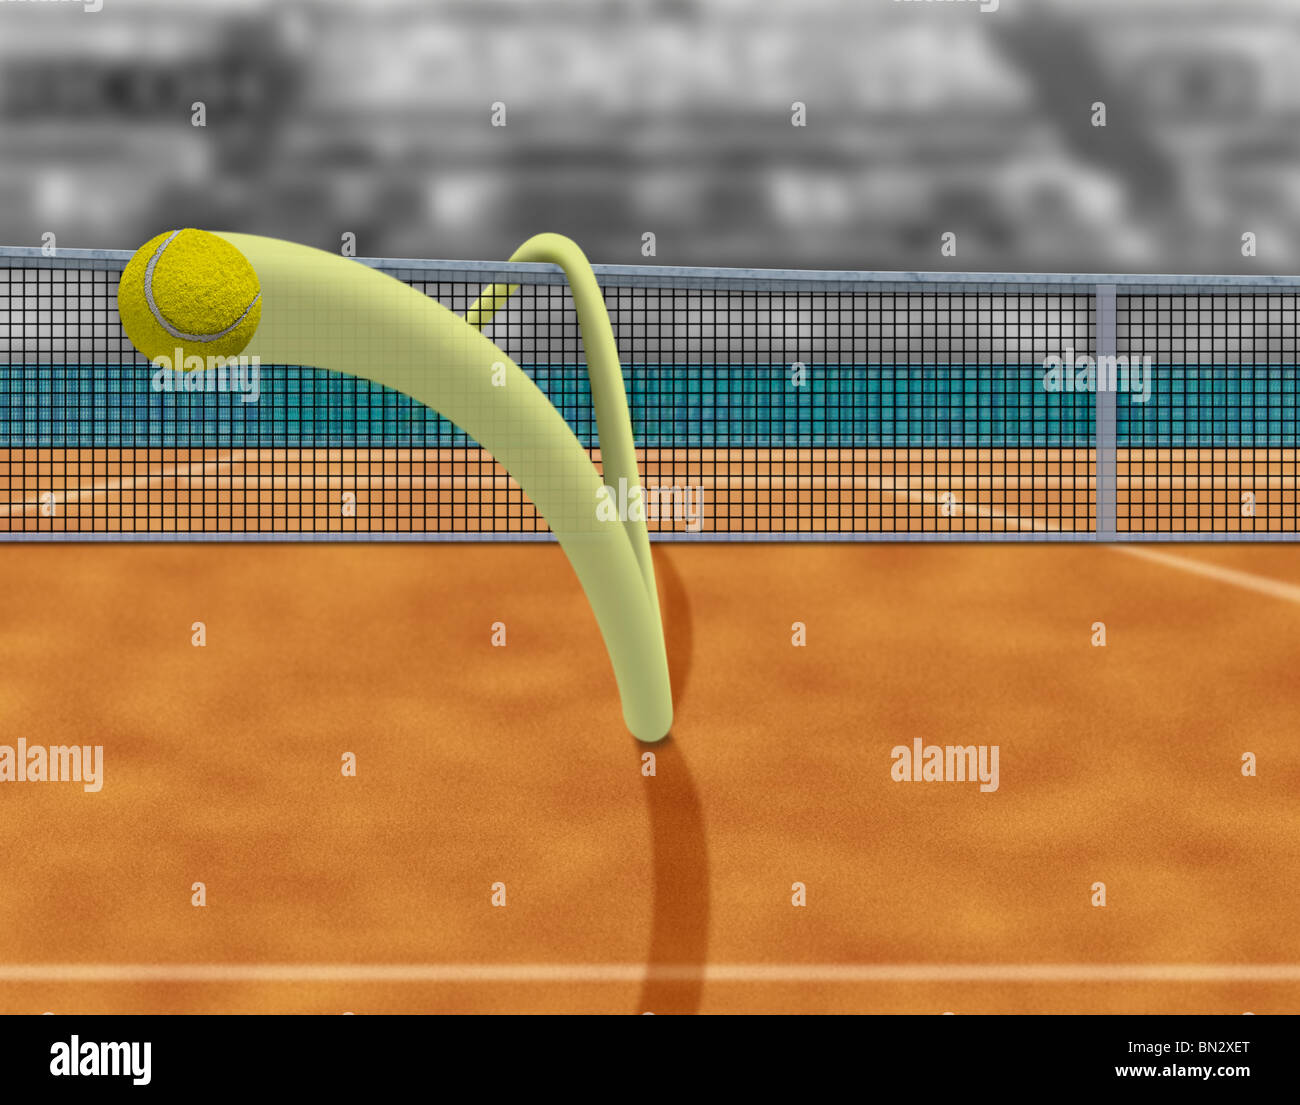 Digital reproduction in 3d of an illustration of the old Hawkeye seen on  television on the tennis courts Stock Photo - Alamy